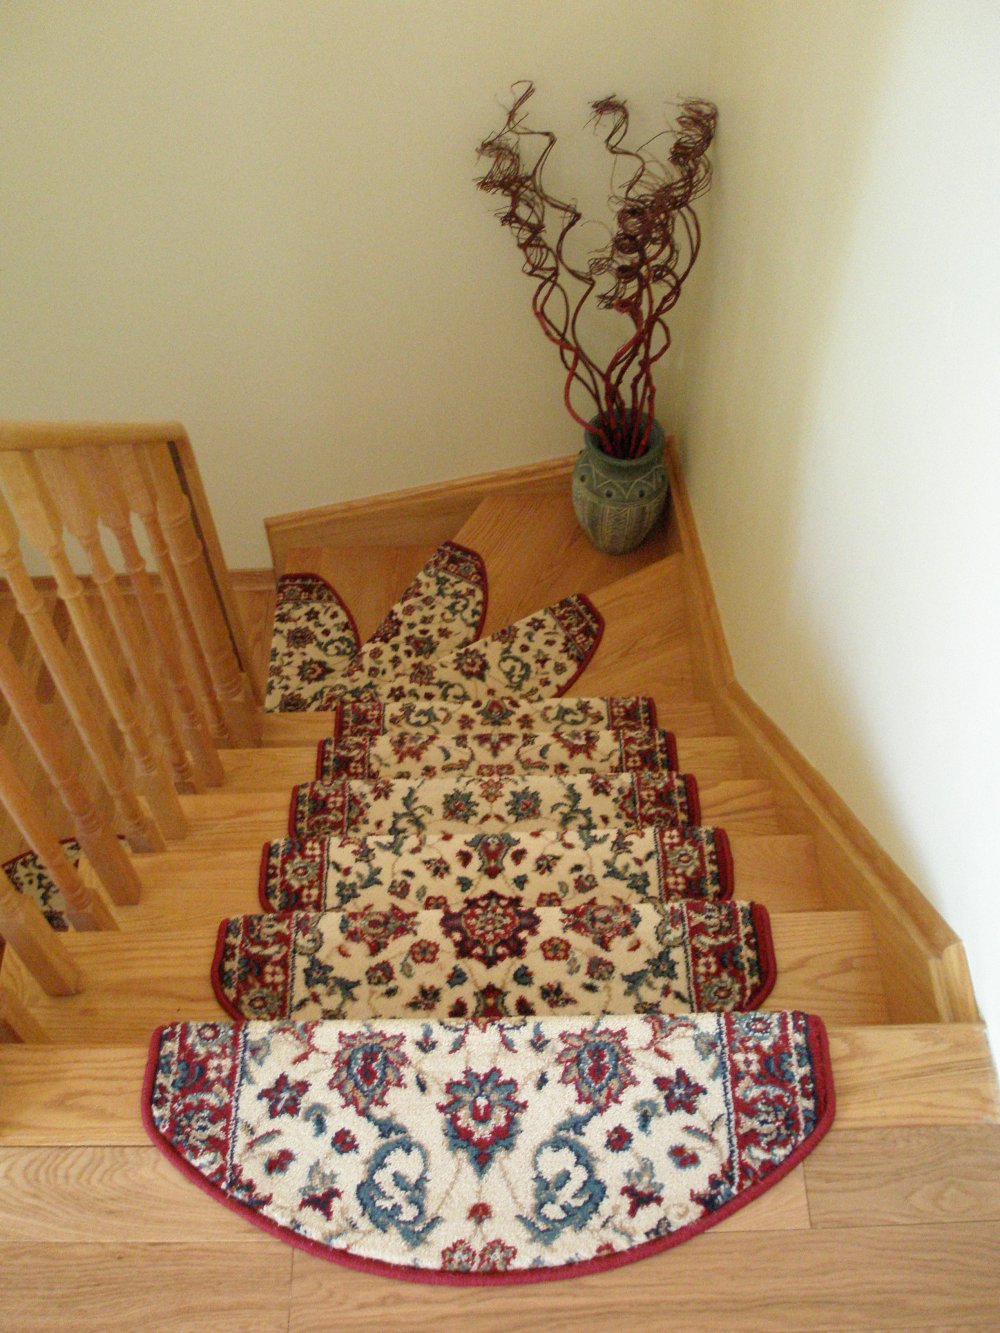 Carpet Stair Treads Store Stairmats Com Stair Rugs,Cooking Ribs On Charcoal Grill